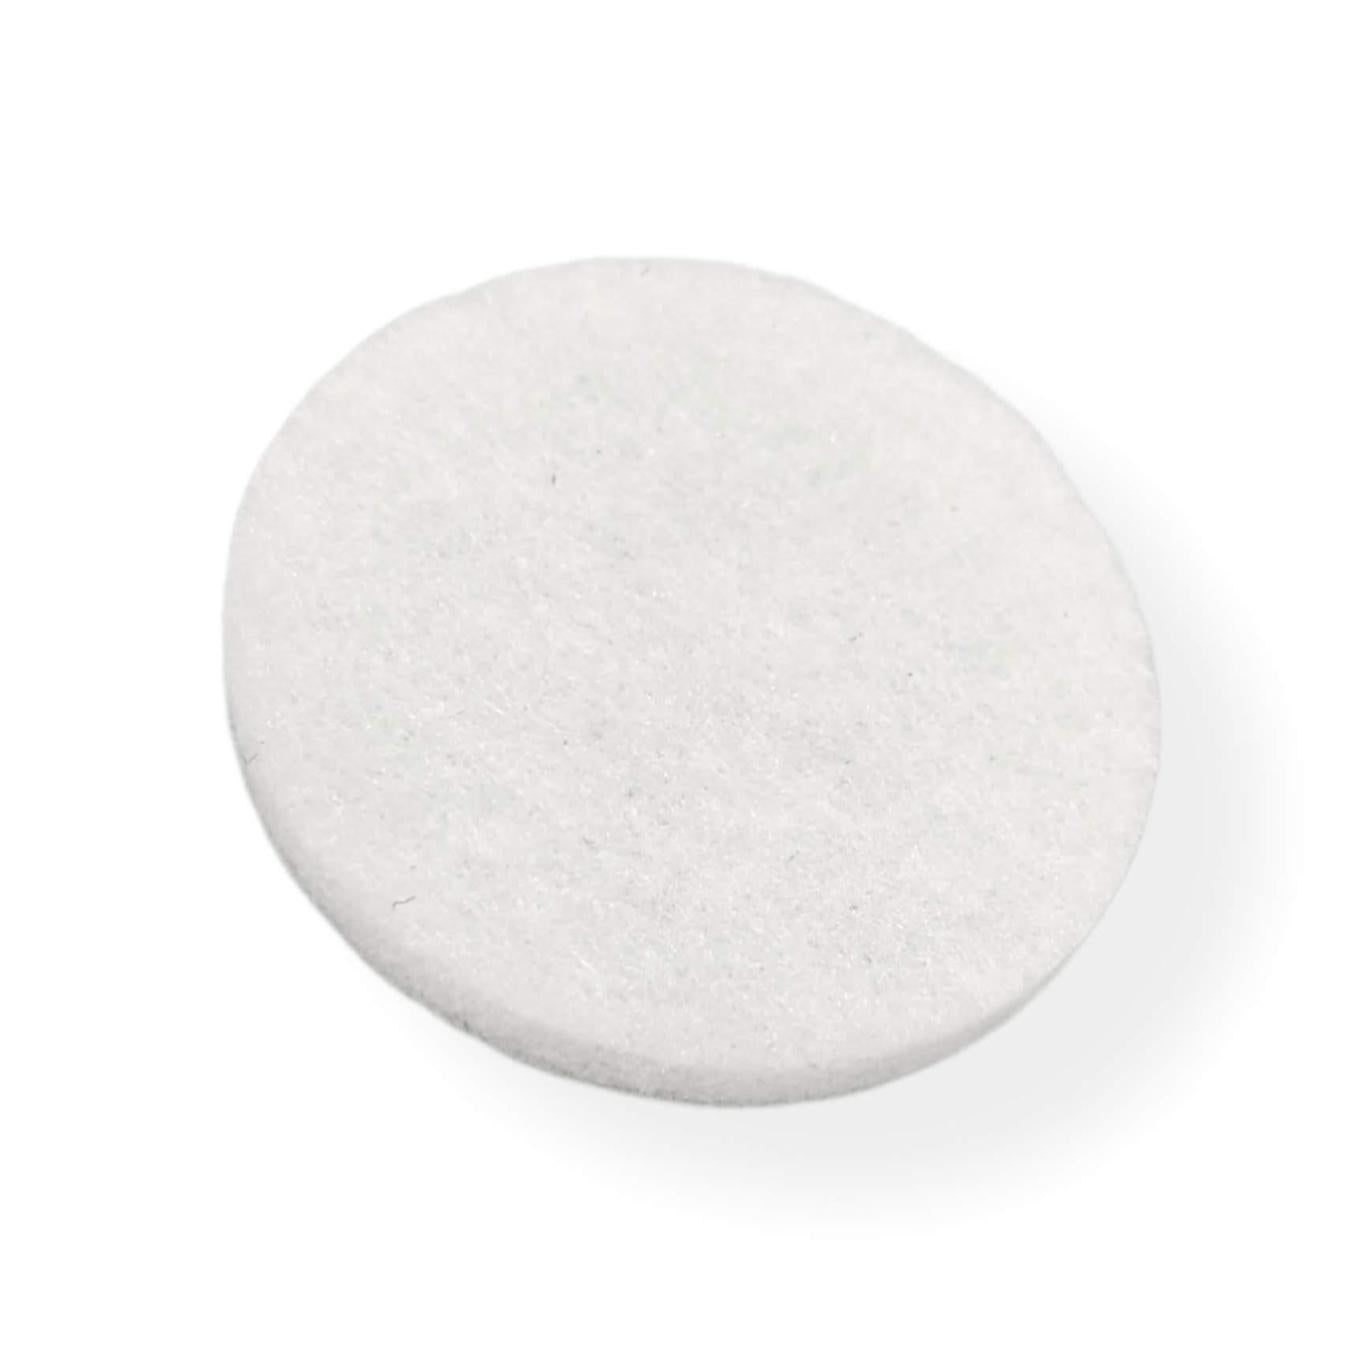 Felt Pads - White Self Adhesive Stick on Felt - Round 60mm Diameter - Made in Germany - Keay Vital Parts